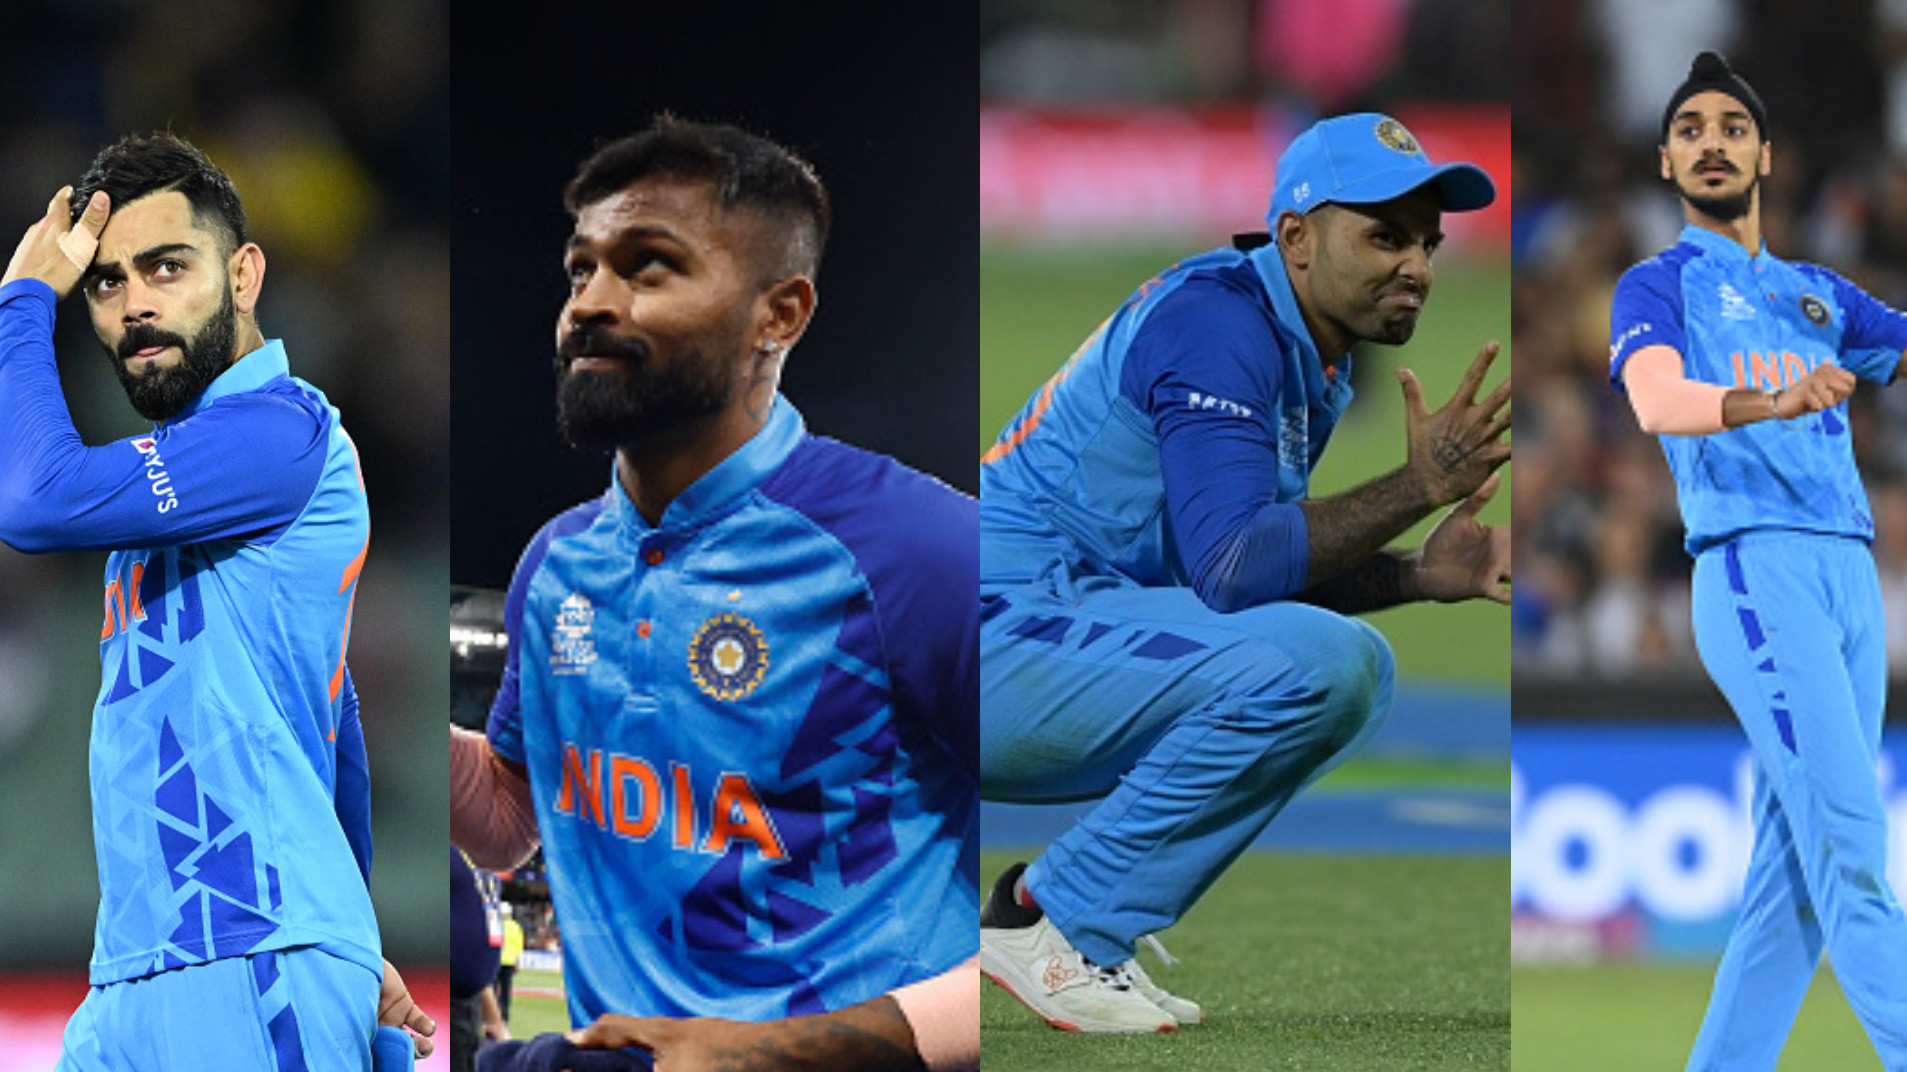 T20 World Cup 2022: “Devastated, gutted, hurt”- Team India members share feelings after exit from T20 WC